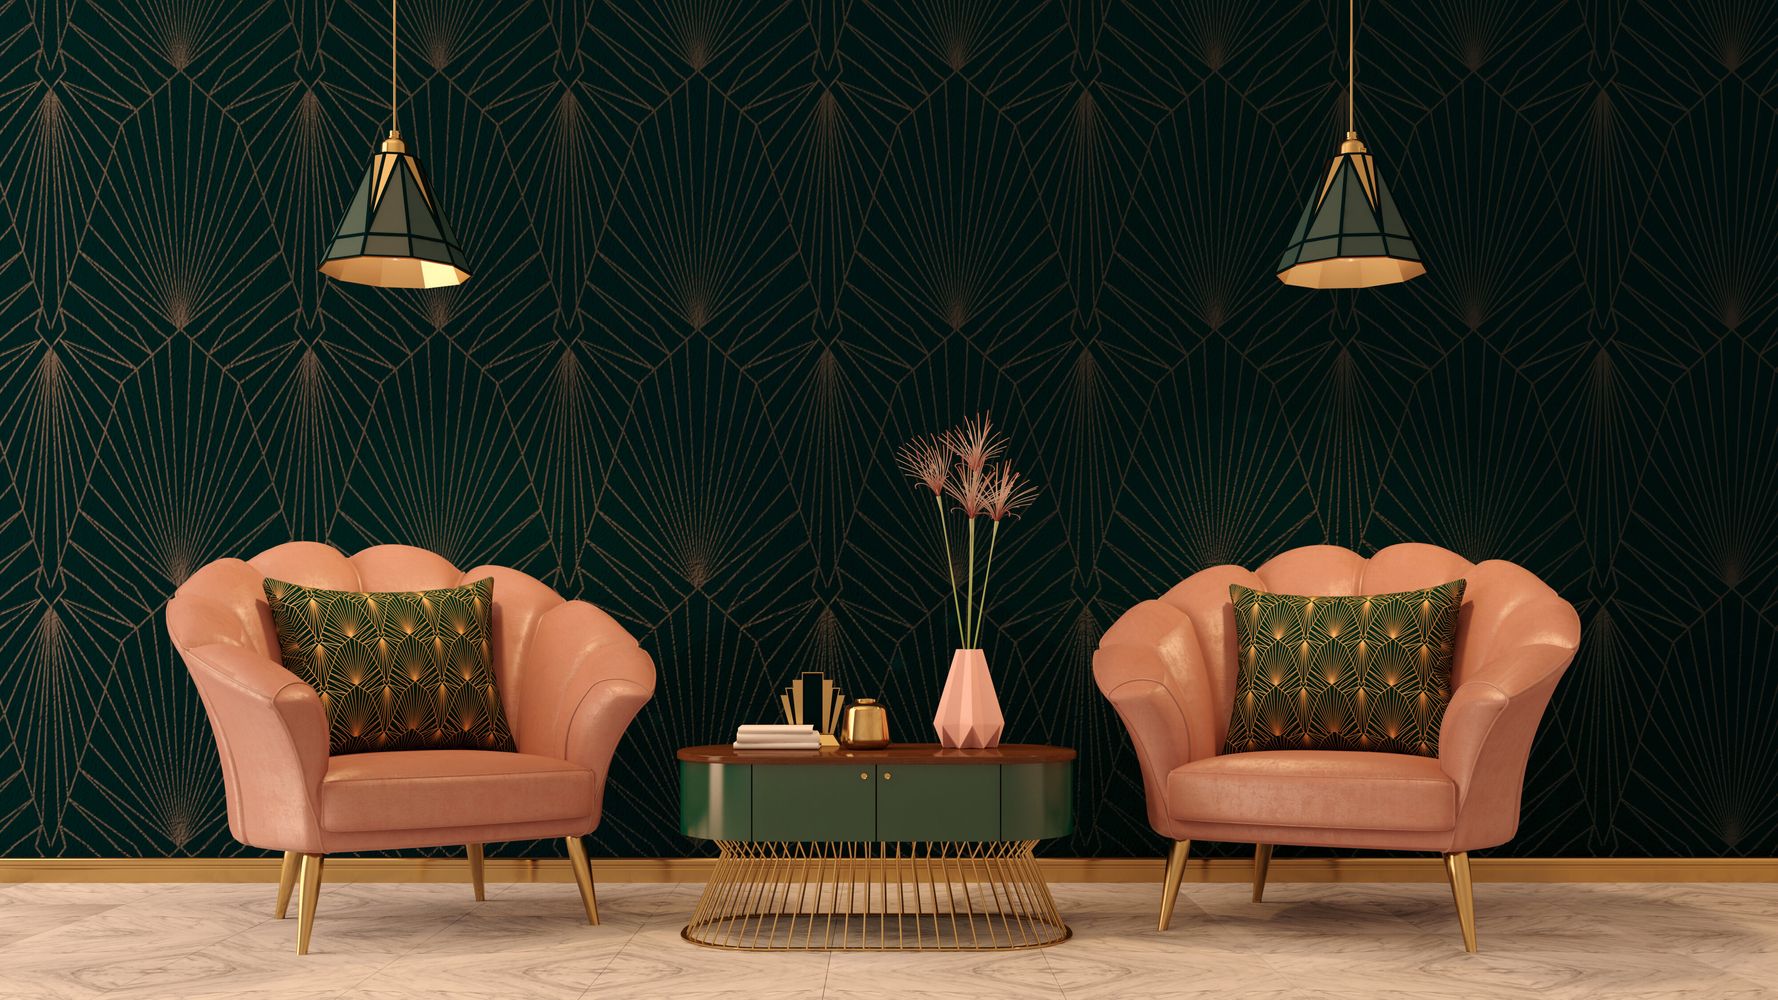 The Best Places To Get Affordable Art Deco-Inspired Furniture And Decor